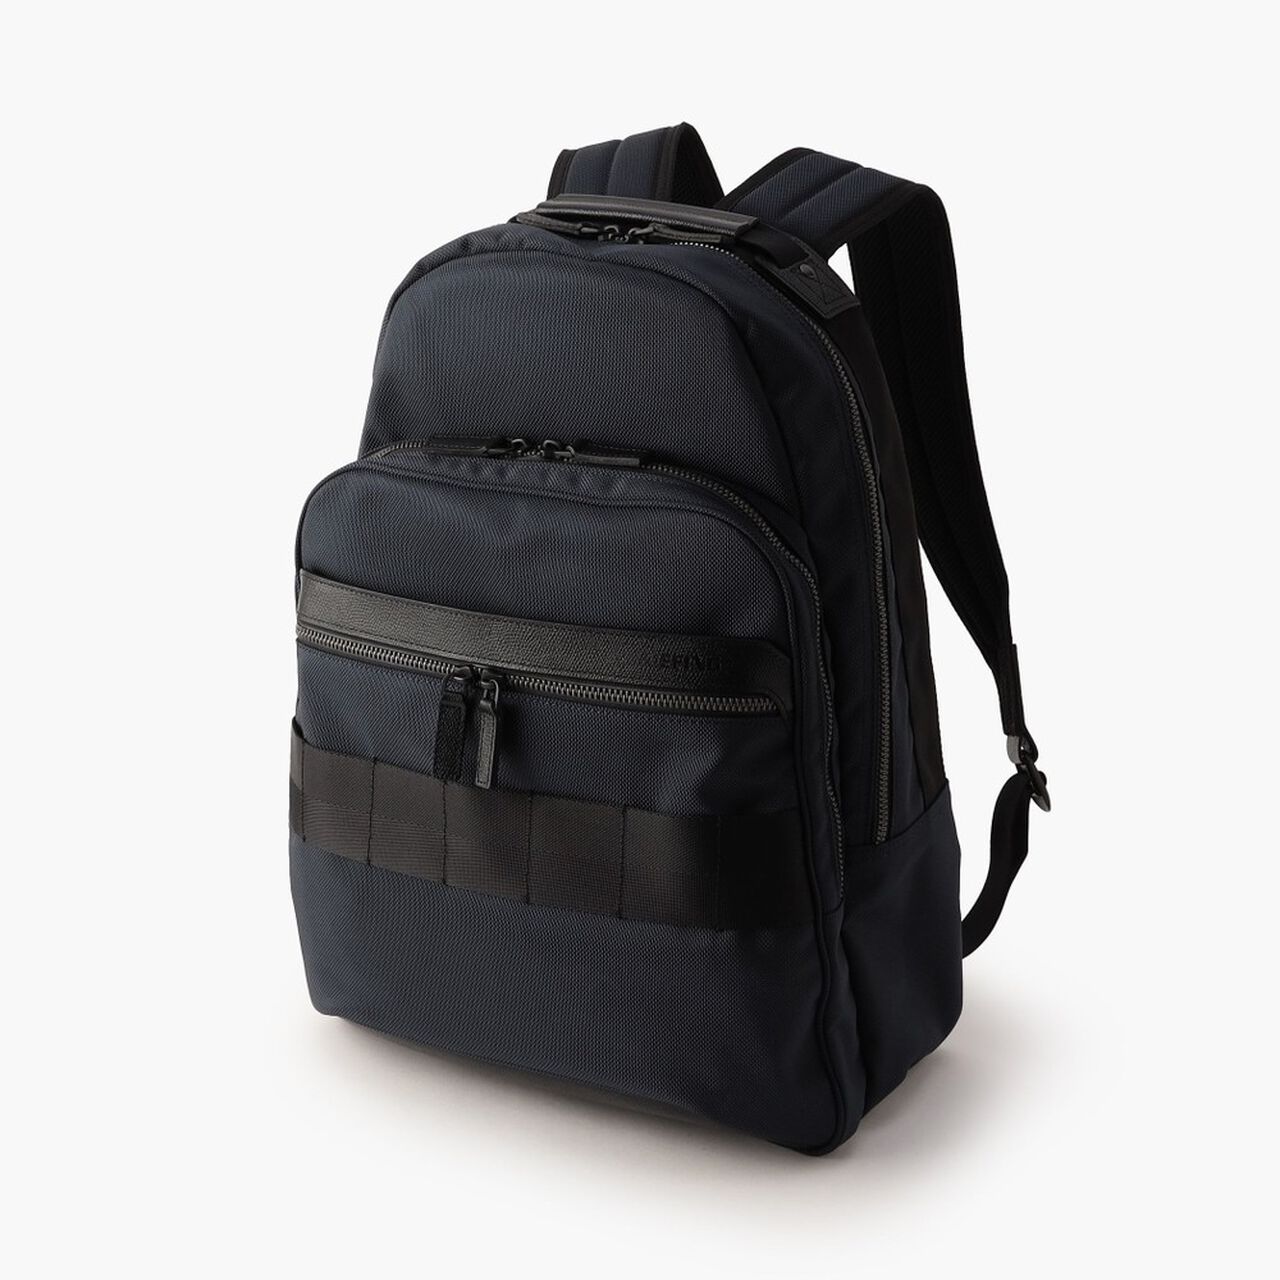 FUSION URBAN PACK,Navy, large image number 0